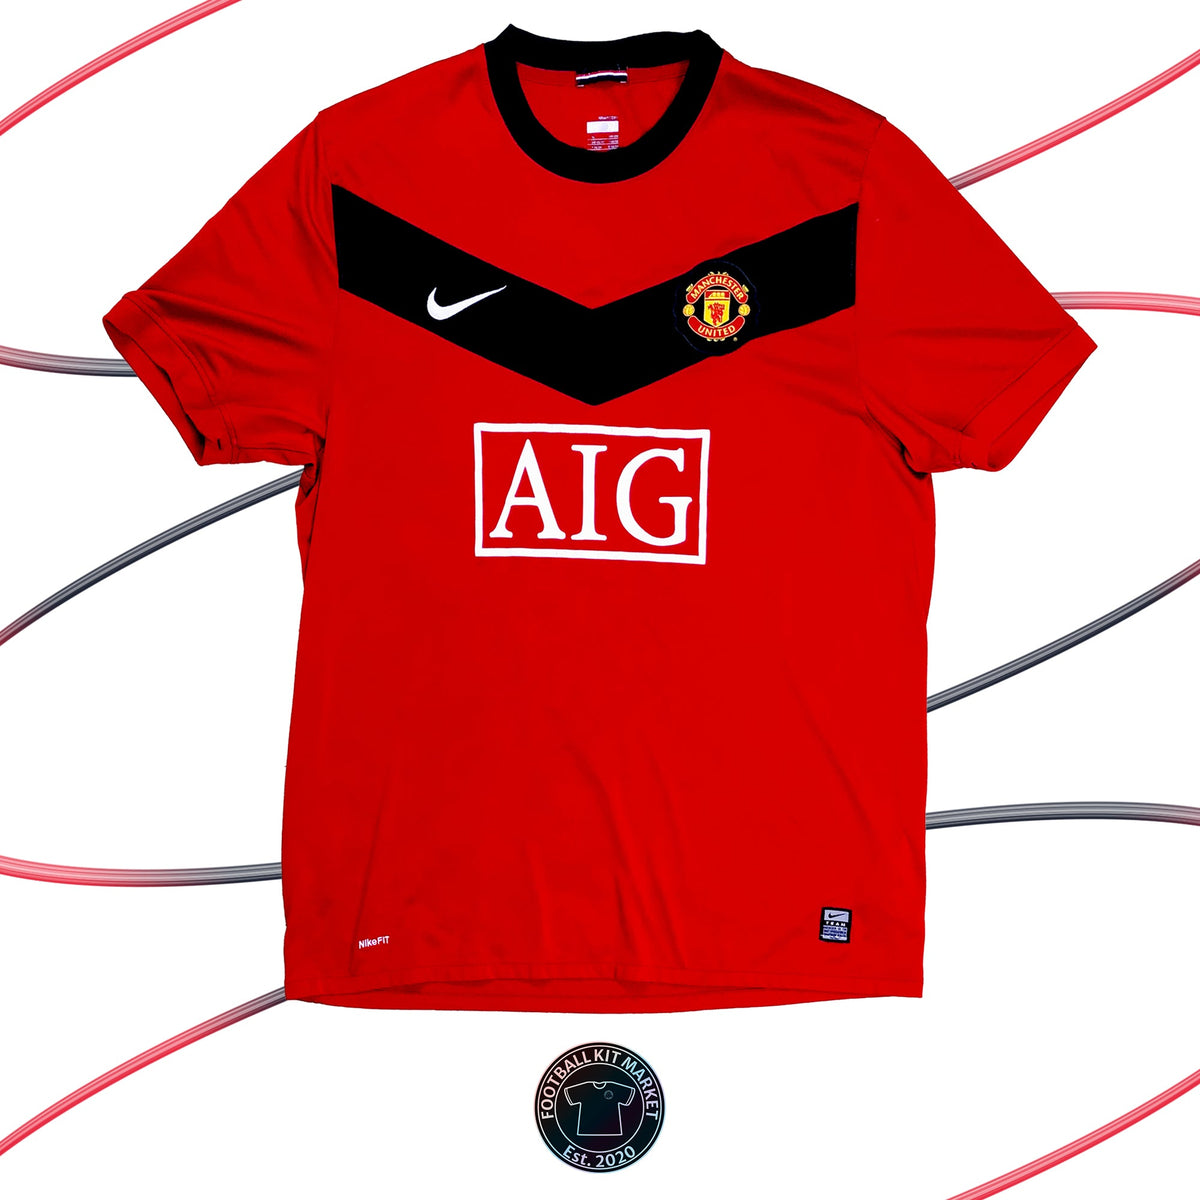 Genuine MANCHESTER UNITED Home (2009-2010) - NIKE (XL) - Product Image from Football Kit Market